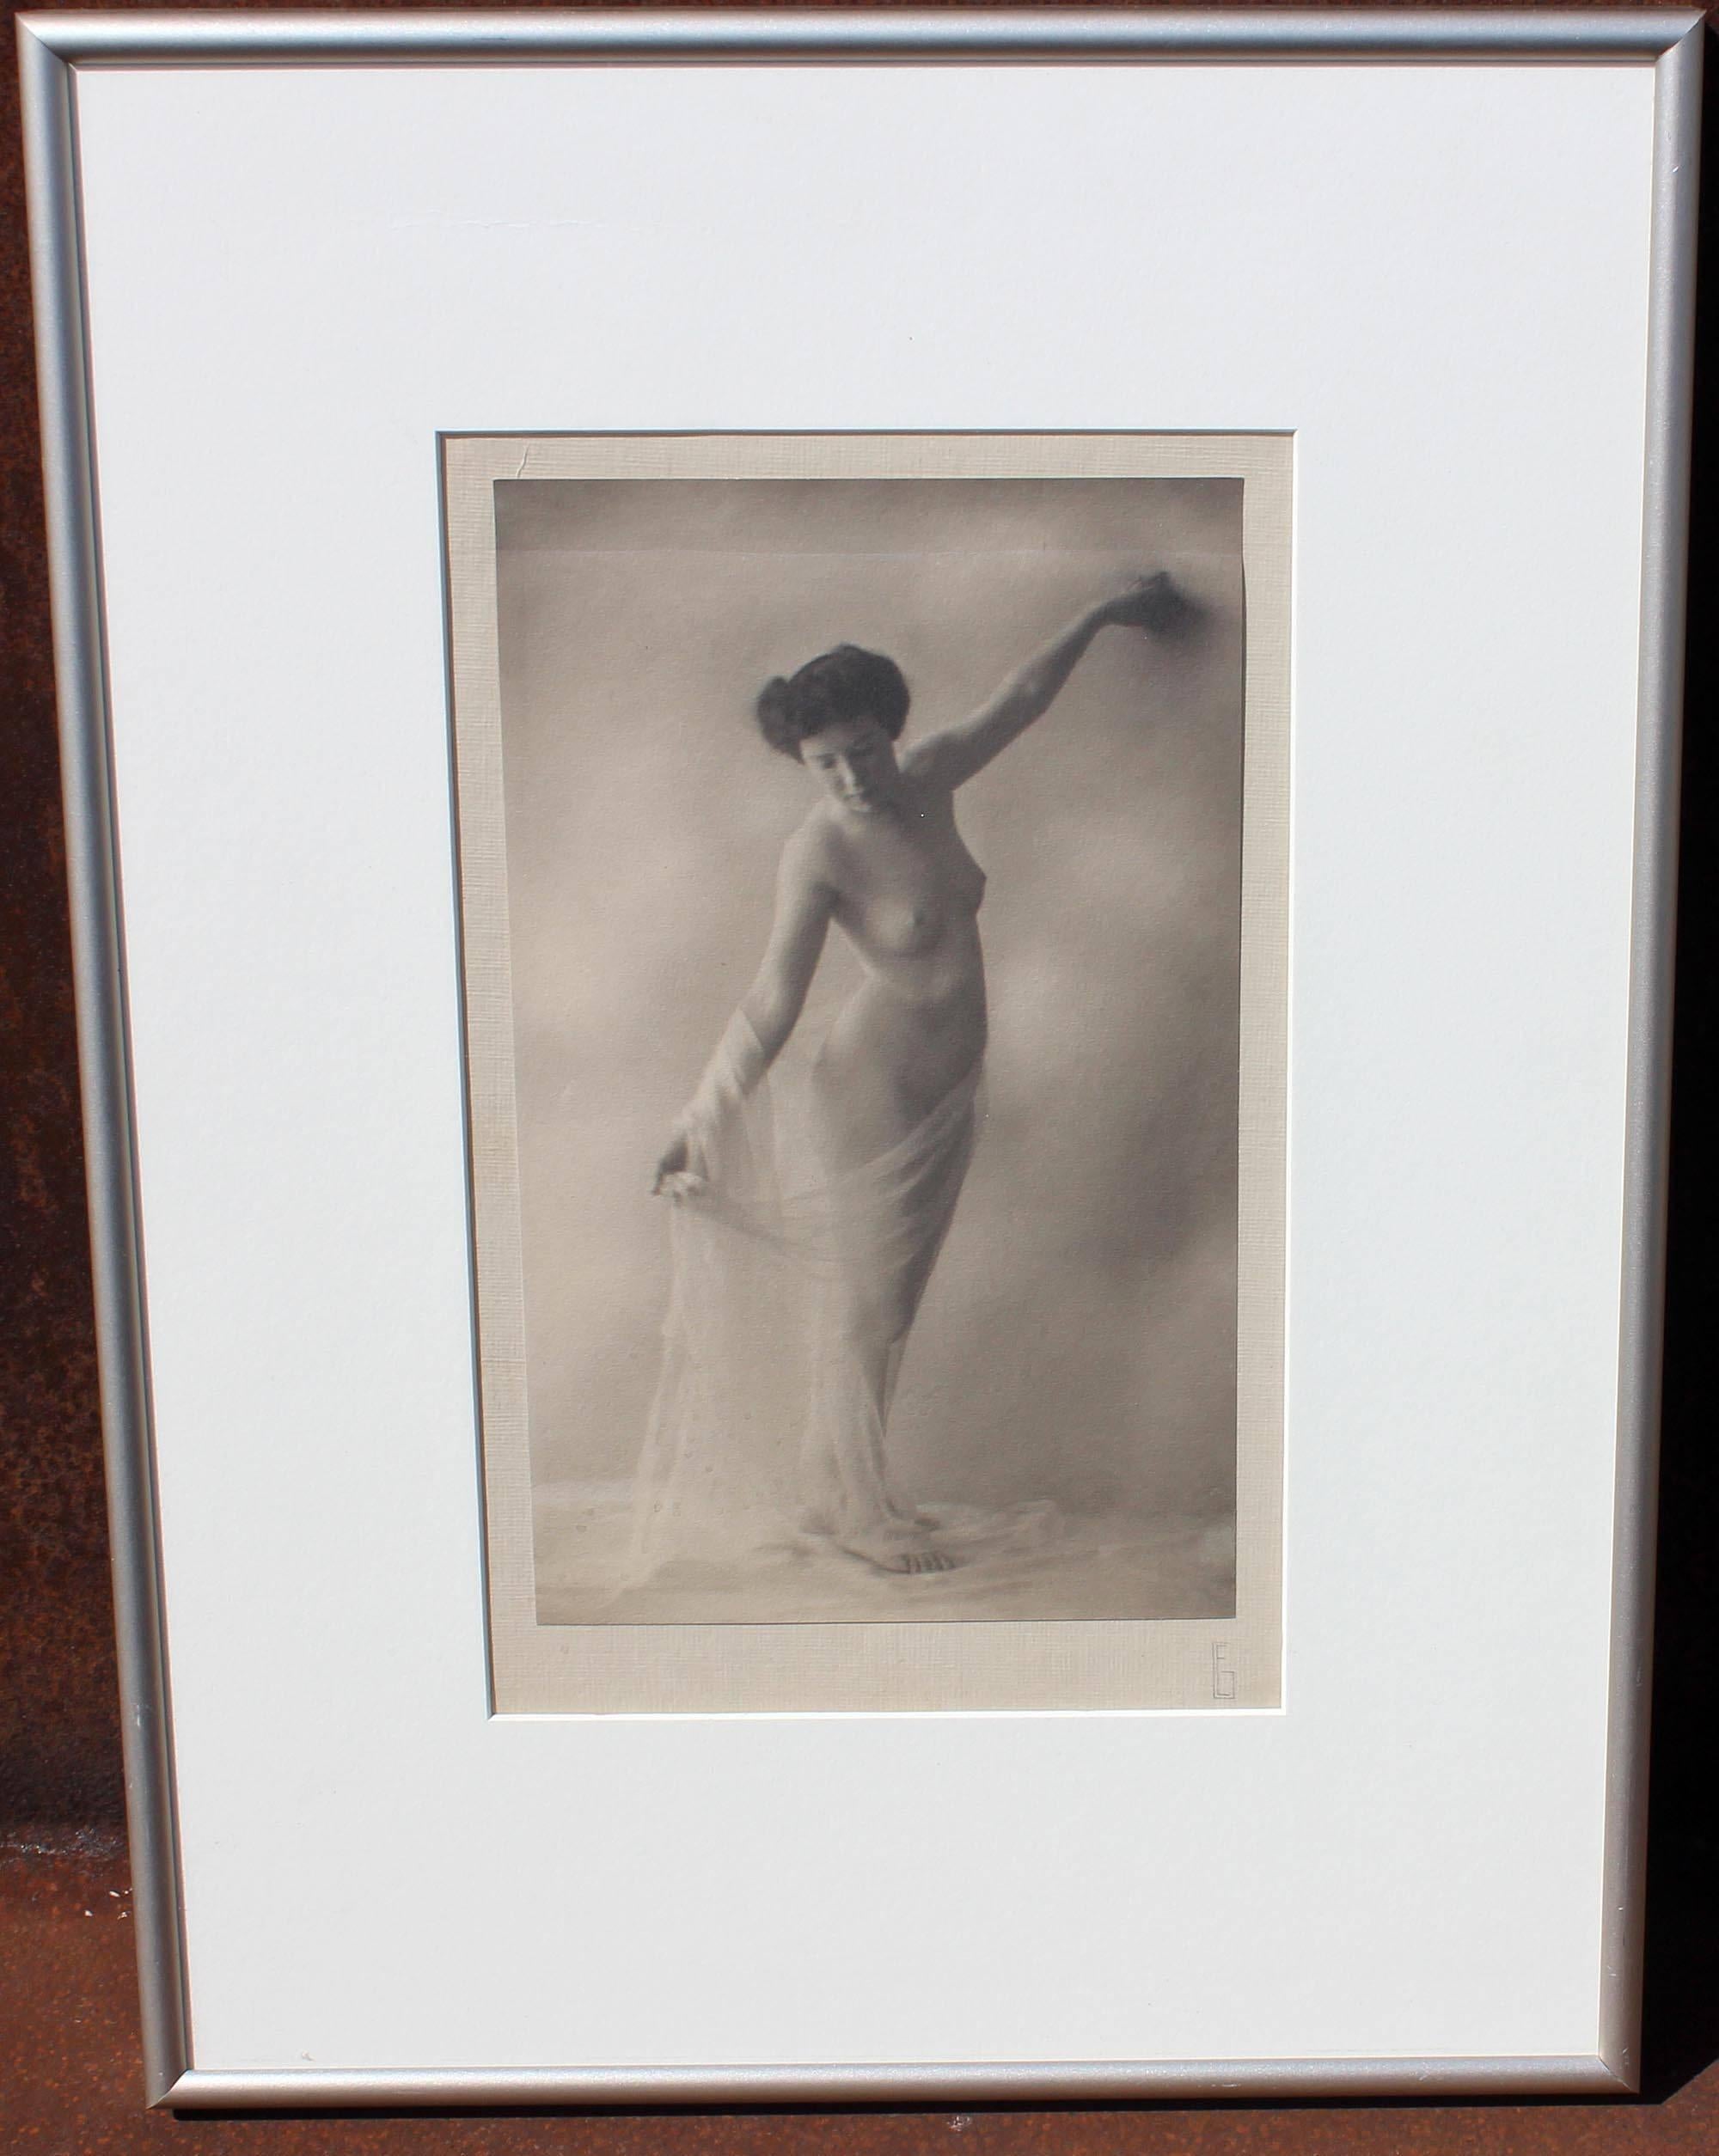 19th century nude photography